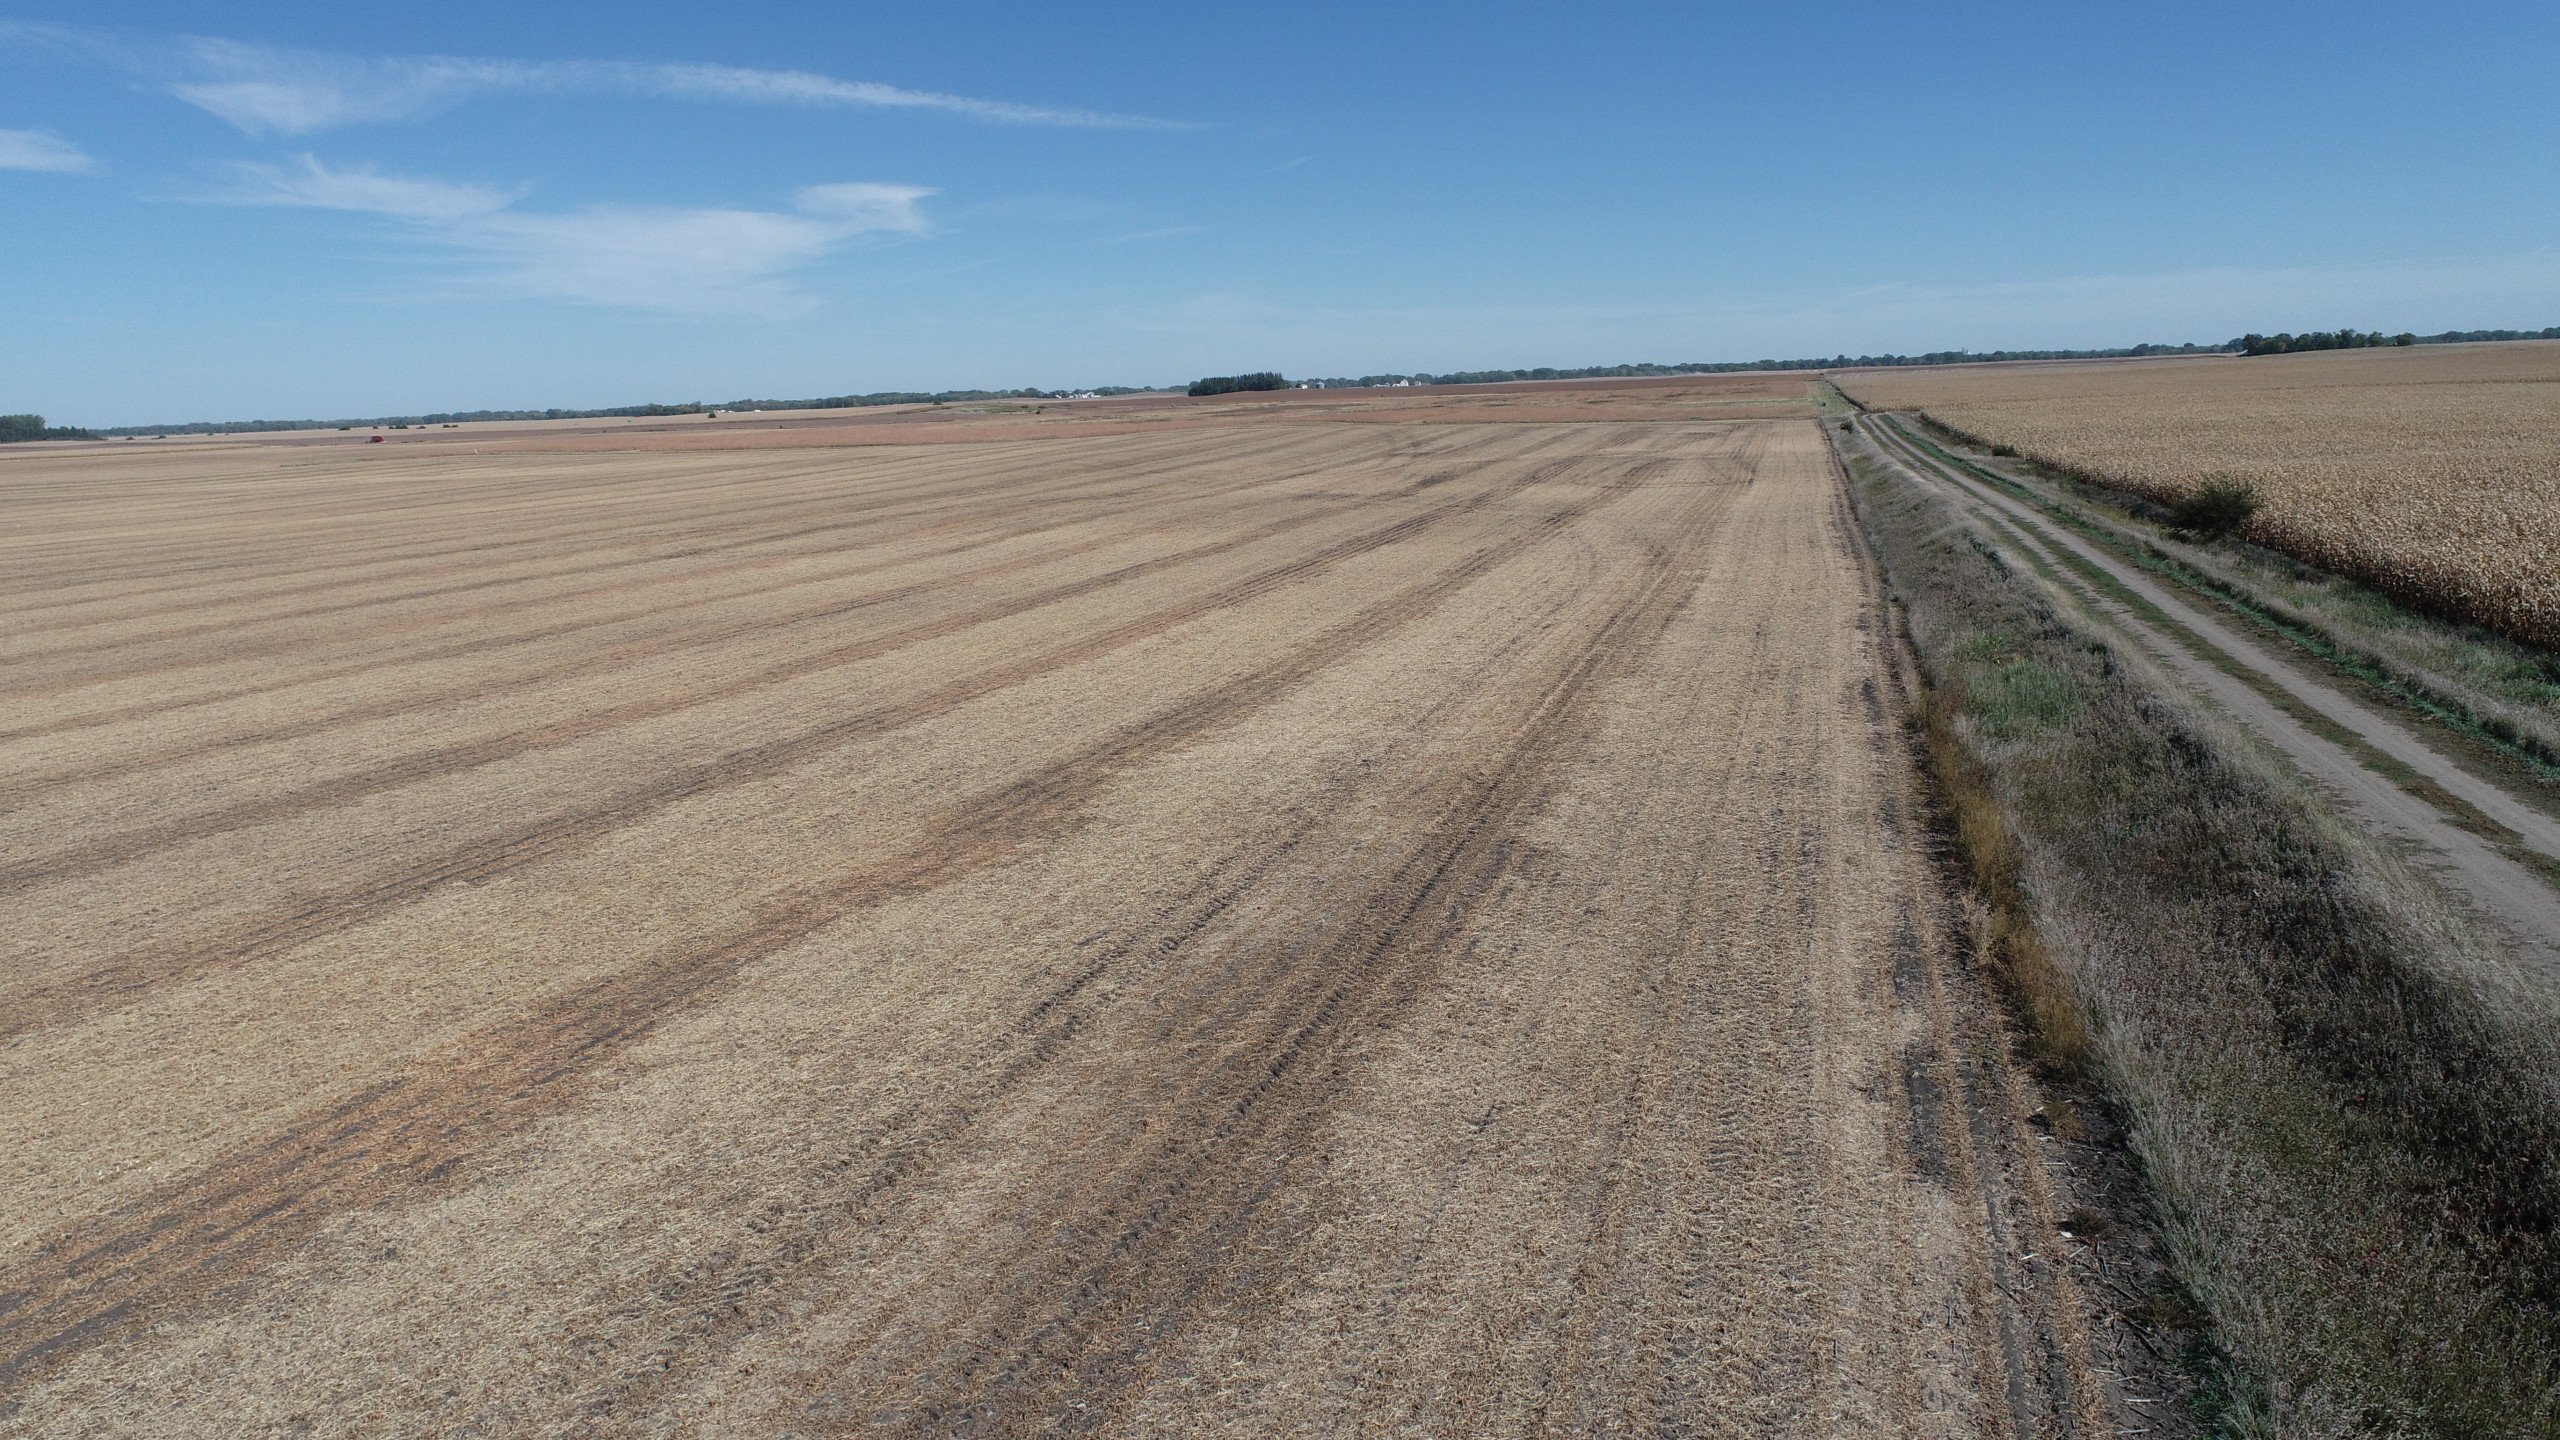 auctions-land-palo-alto-county-iowa-40-acres-listing-number-16454-DJI_0493-2.jpg